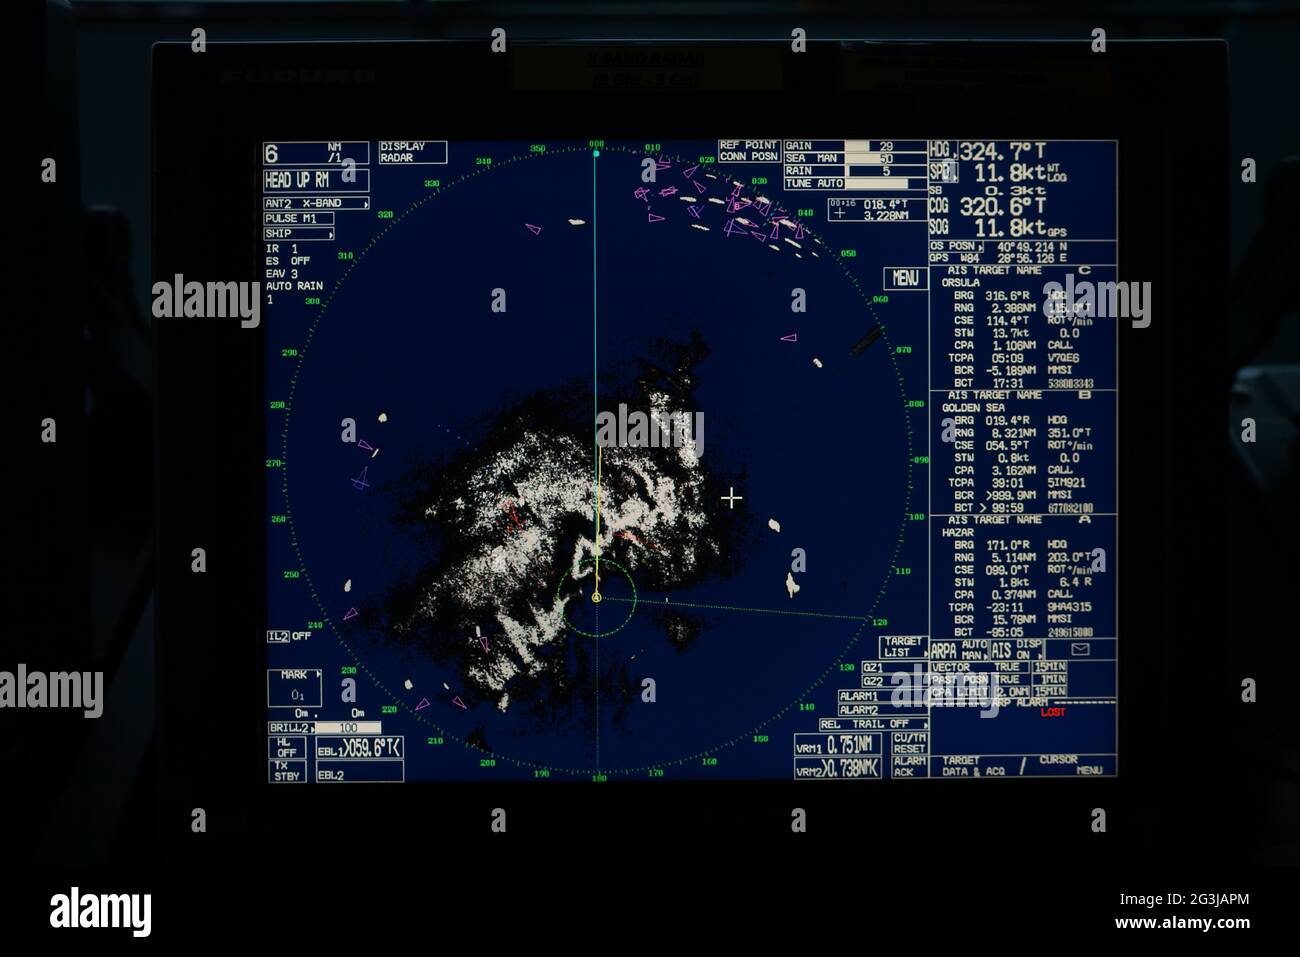 targets (vessels, ships, lands, islands, rock, route, course) on ARPA radar display. The vessel is proceeding to the entrance of the Bosphorus strait, heavy on AR Stock Photo